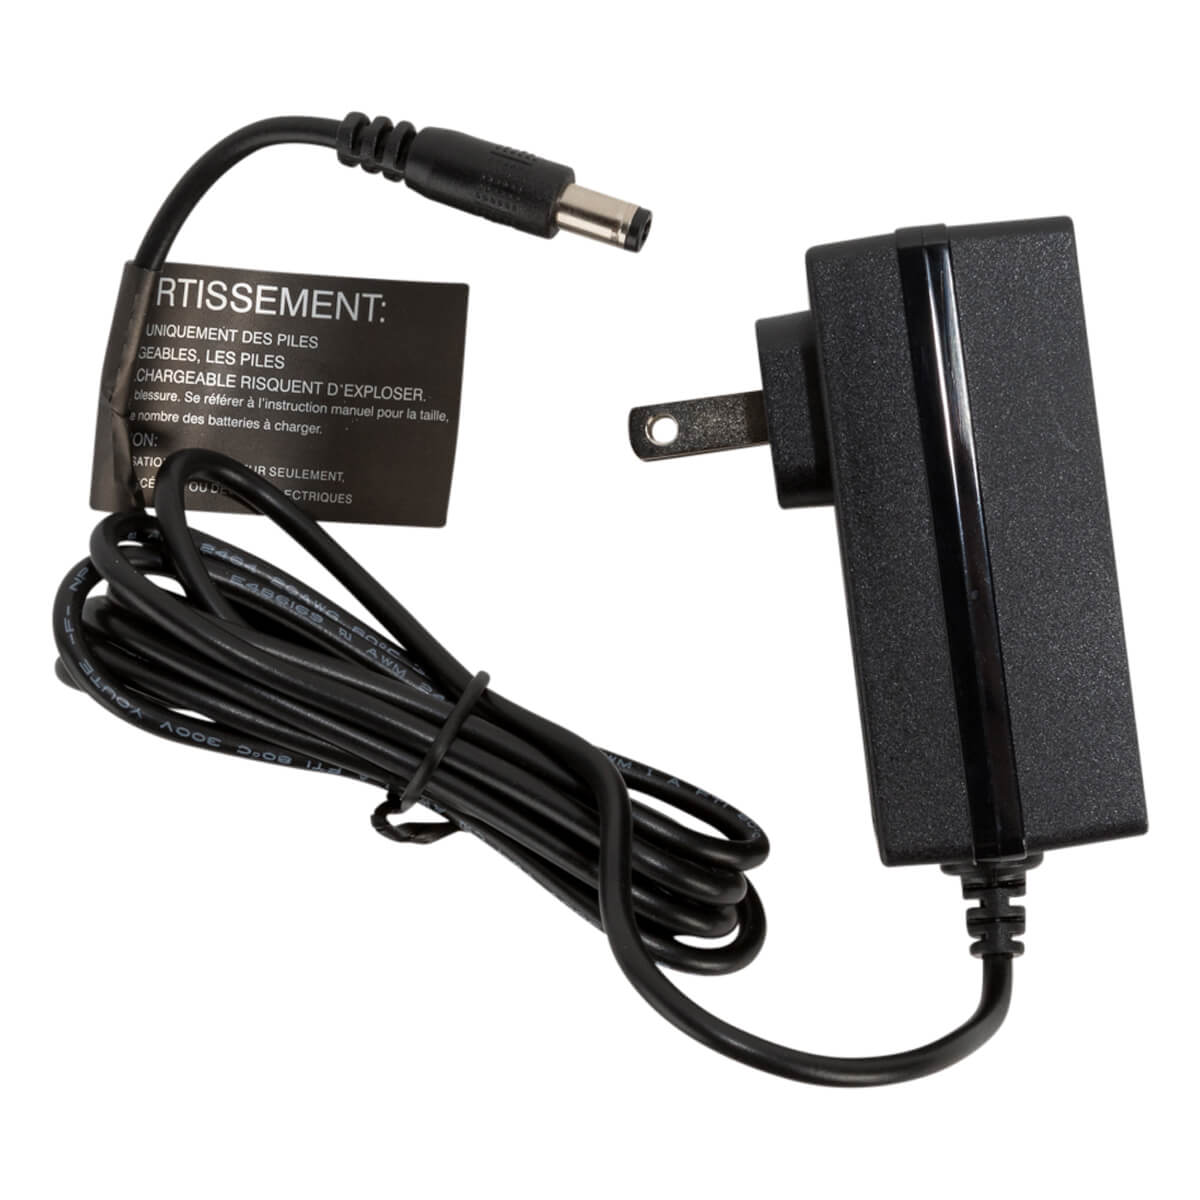 AC charger for 12 volt Battery for Ignite Jackets